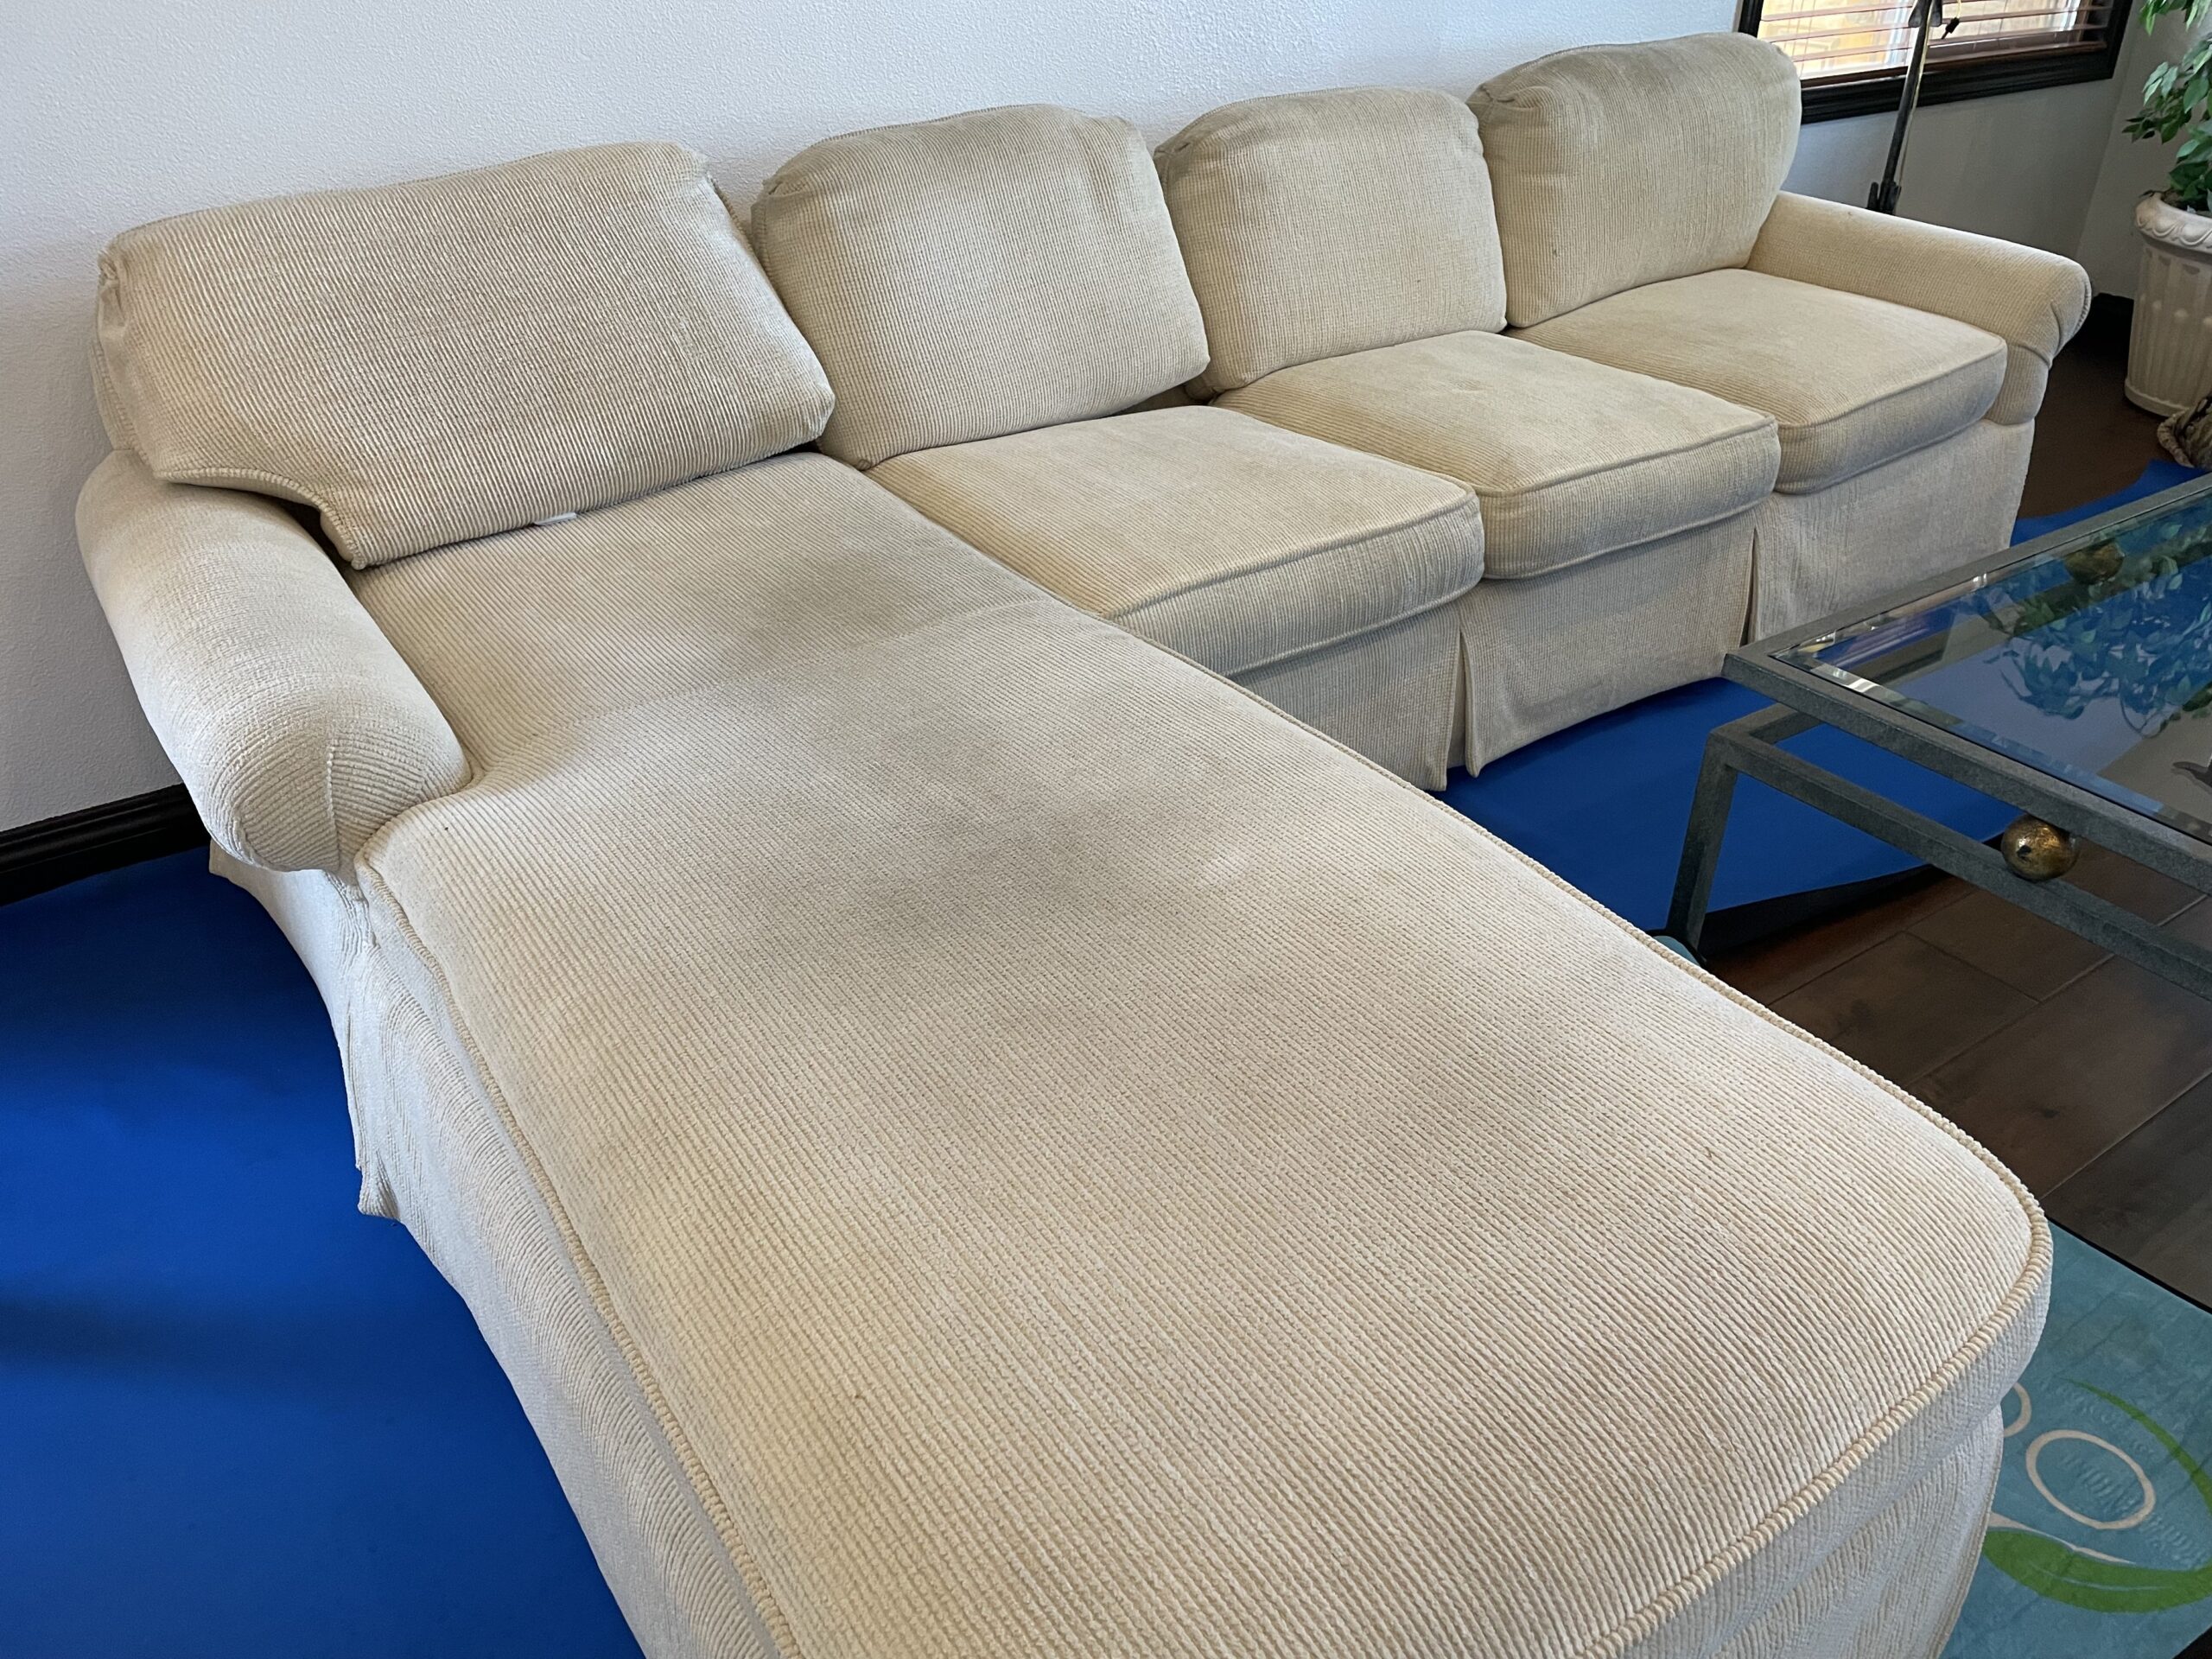 Sofa Cleaning in Orange County